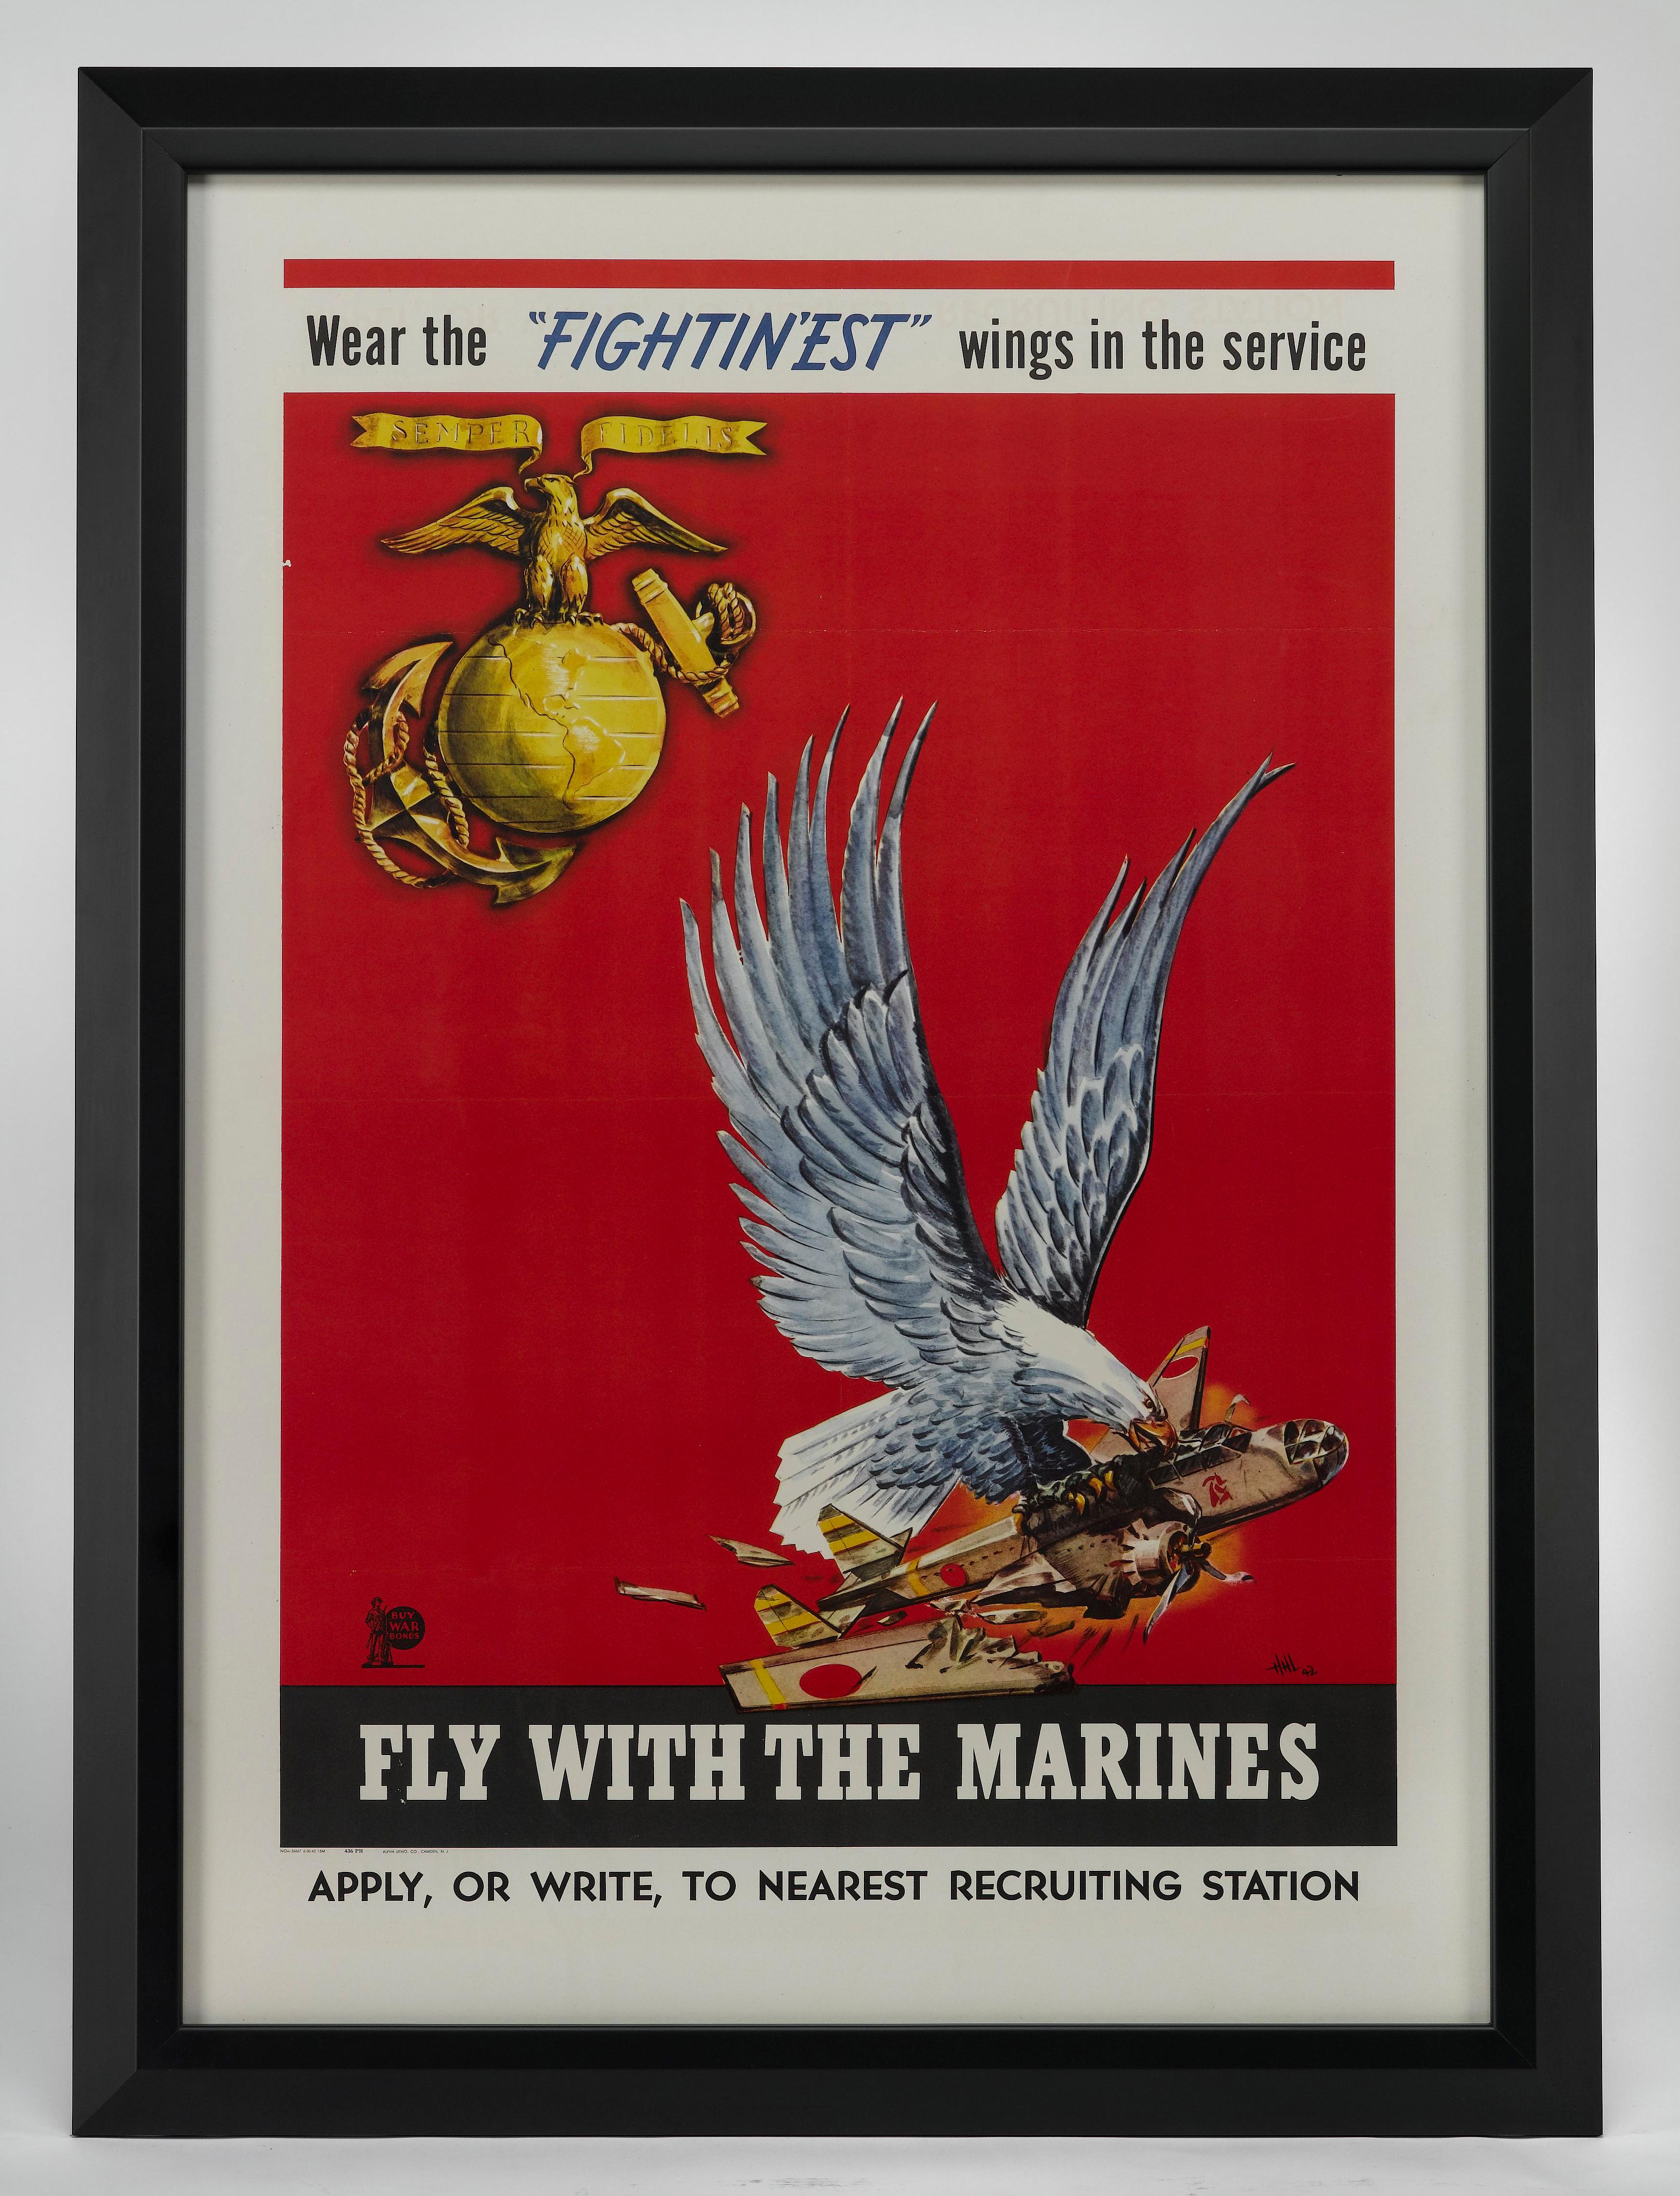 This is an original World War II Marines recruitment poster from 1942. The poster, a color lithograph, was printed by the Alpha Litho. Co., out of Camden, NJ. 

In the center of the composition appears a striking blue eagle, which tears apart a